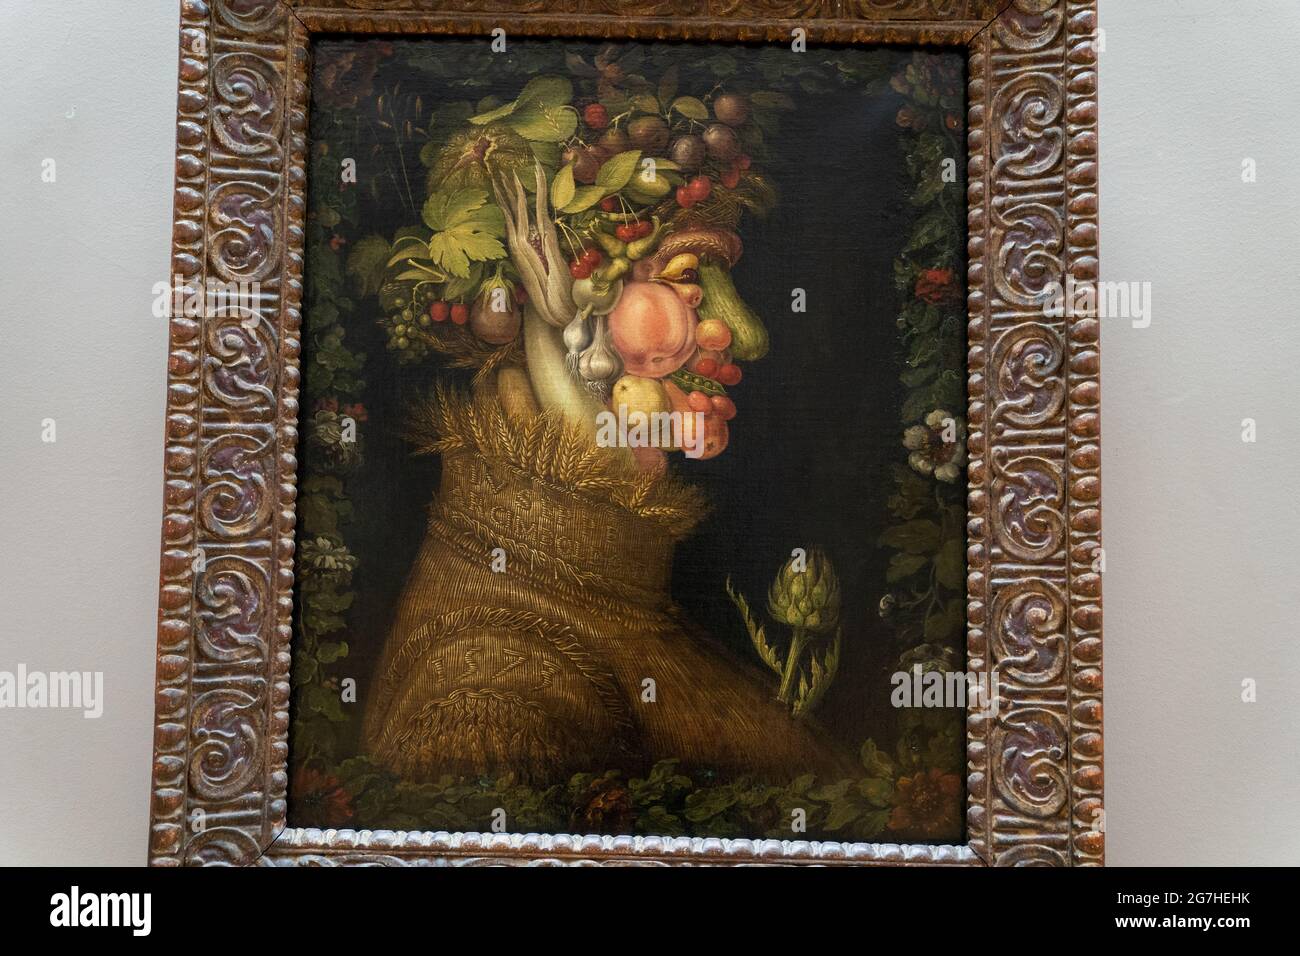 'Summer' by Giuseppe Arcimboldo. Italian painter who created imaginative portrait heads made of objects such as fruits, vegetables, flowers, fishs. Stock Photo